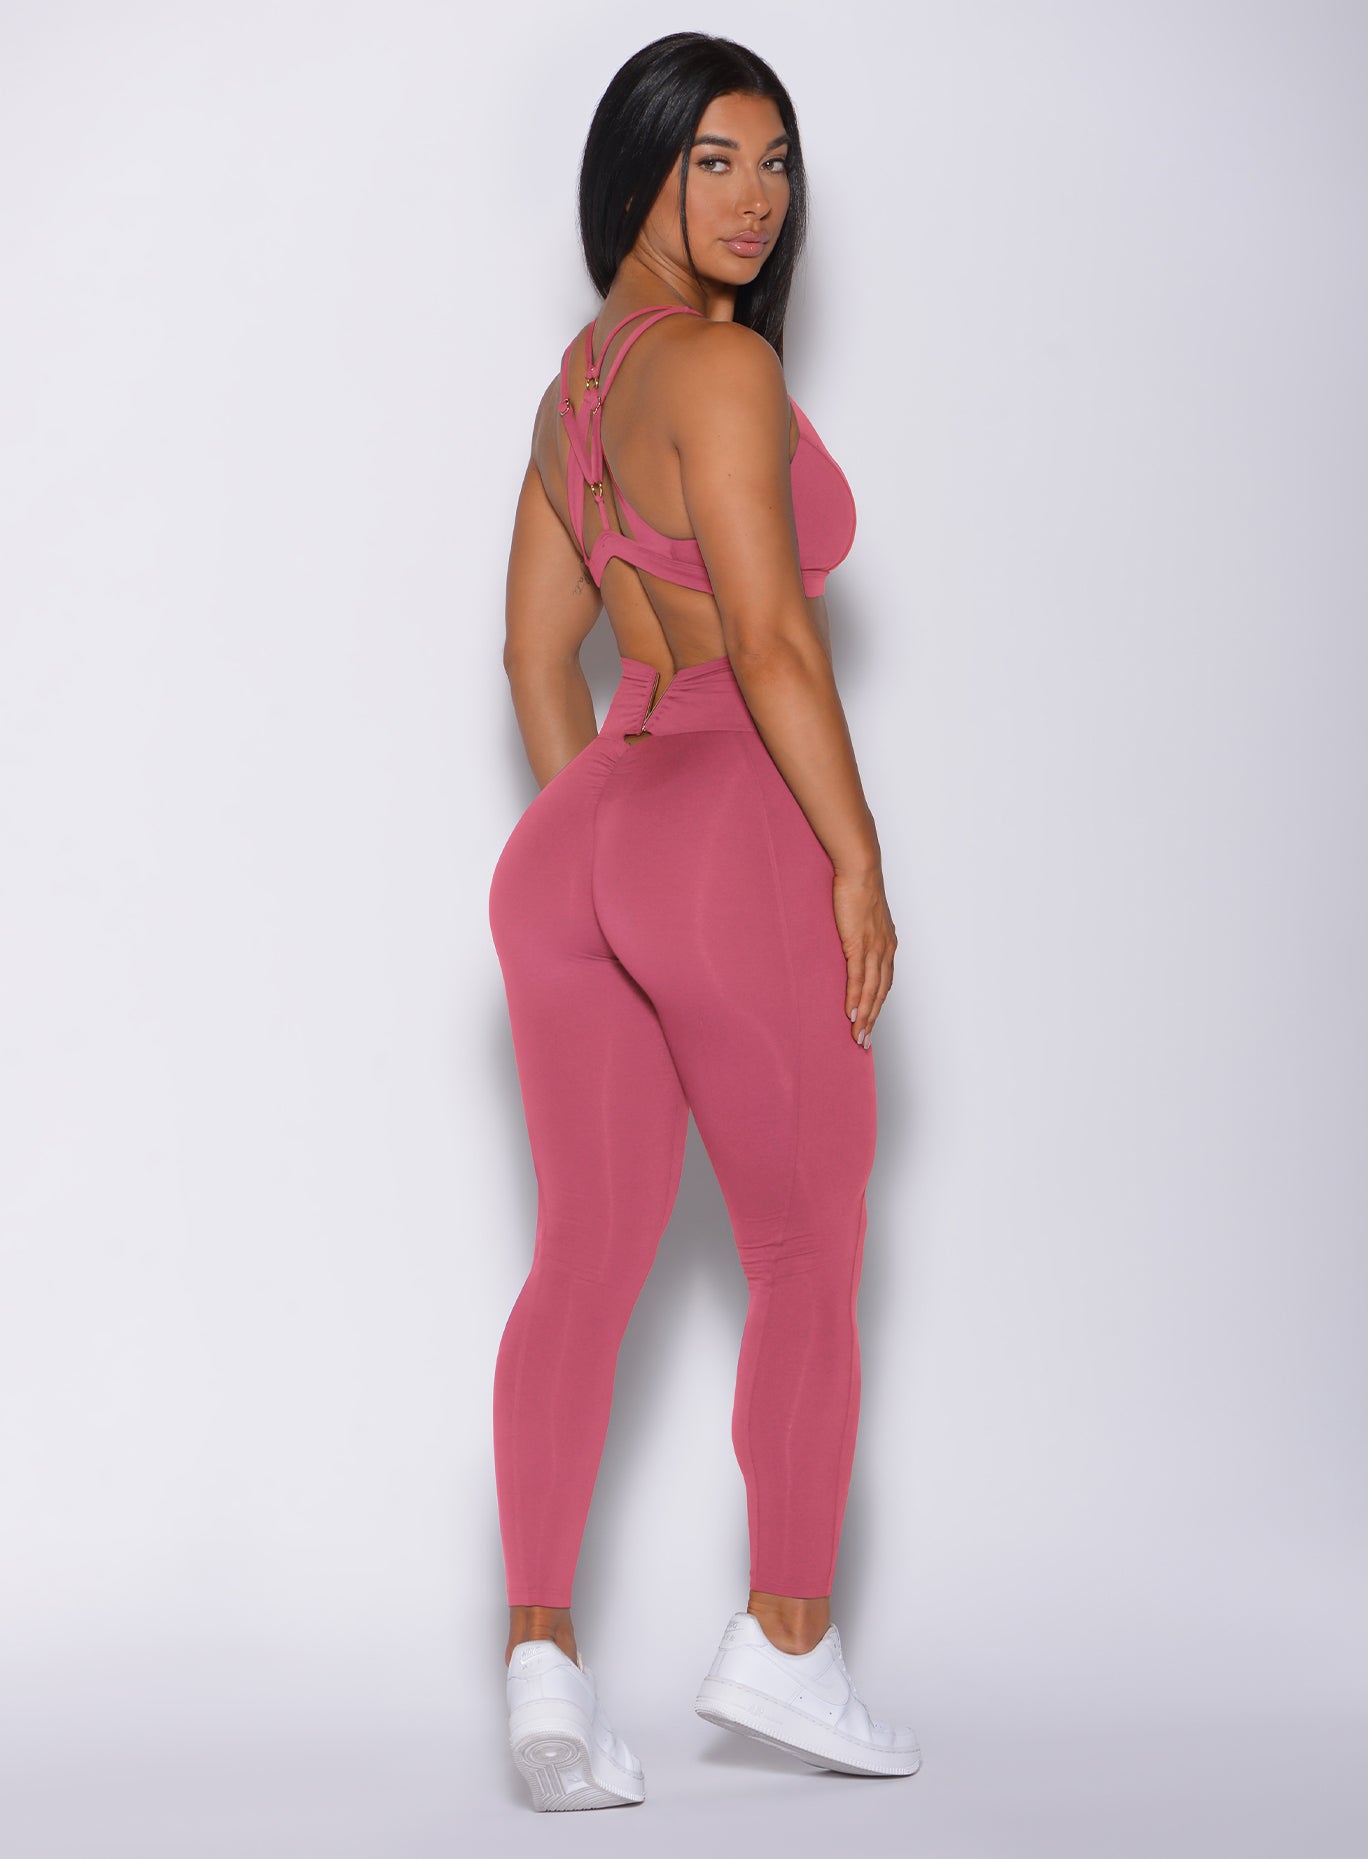 Back side profile view of a model angled slightly to her right wearing our victory leggings in blush color and a matching bra 